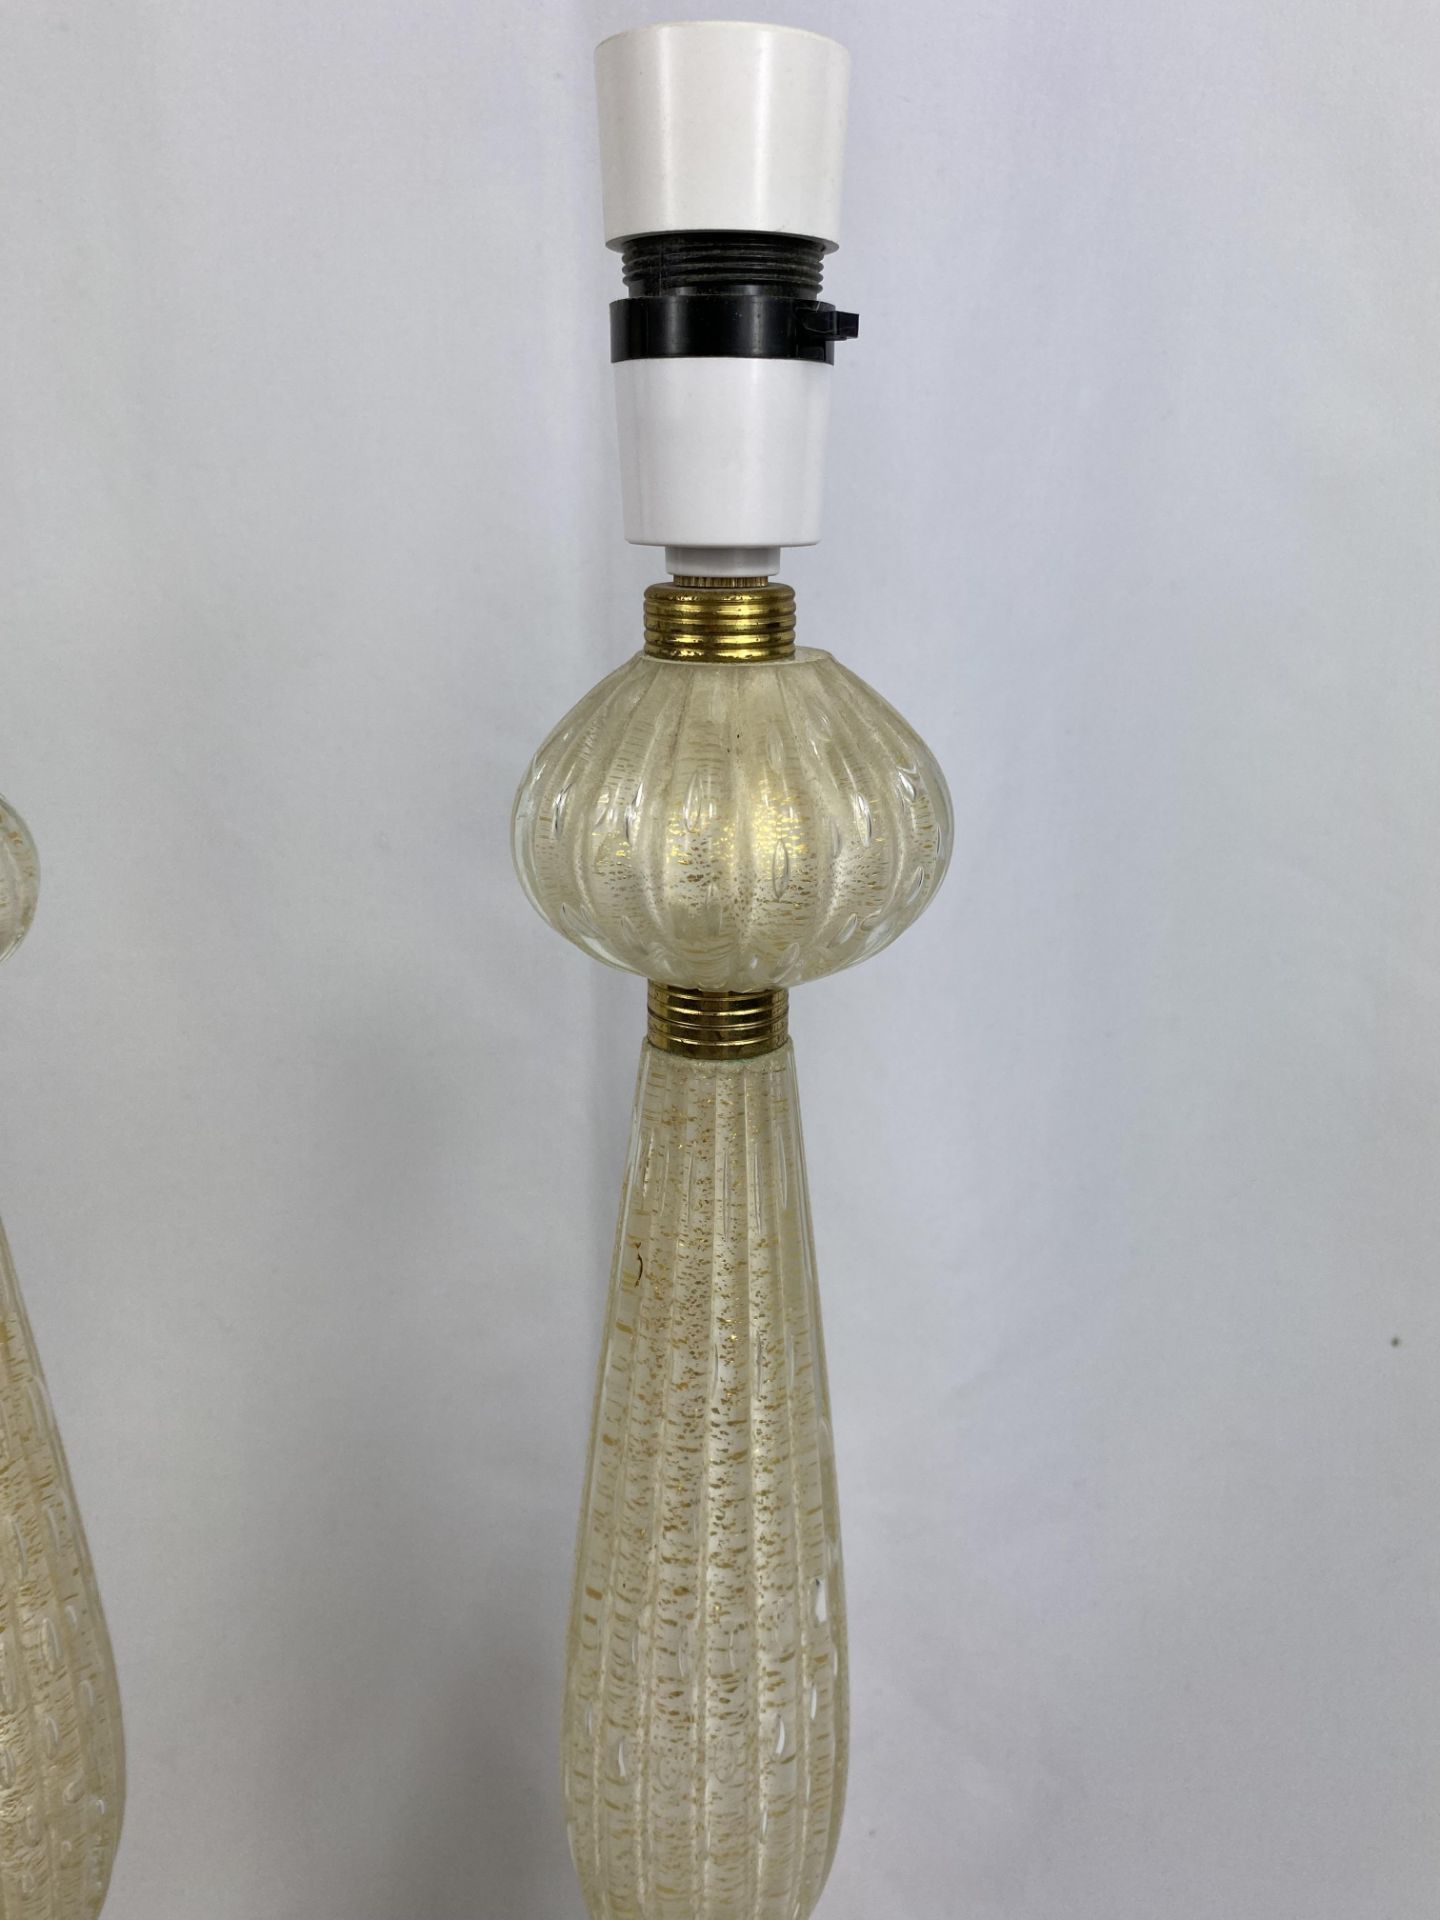 Pair of Barovier & Toso style Murano glass table lamps - Image 2 of 6